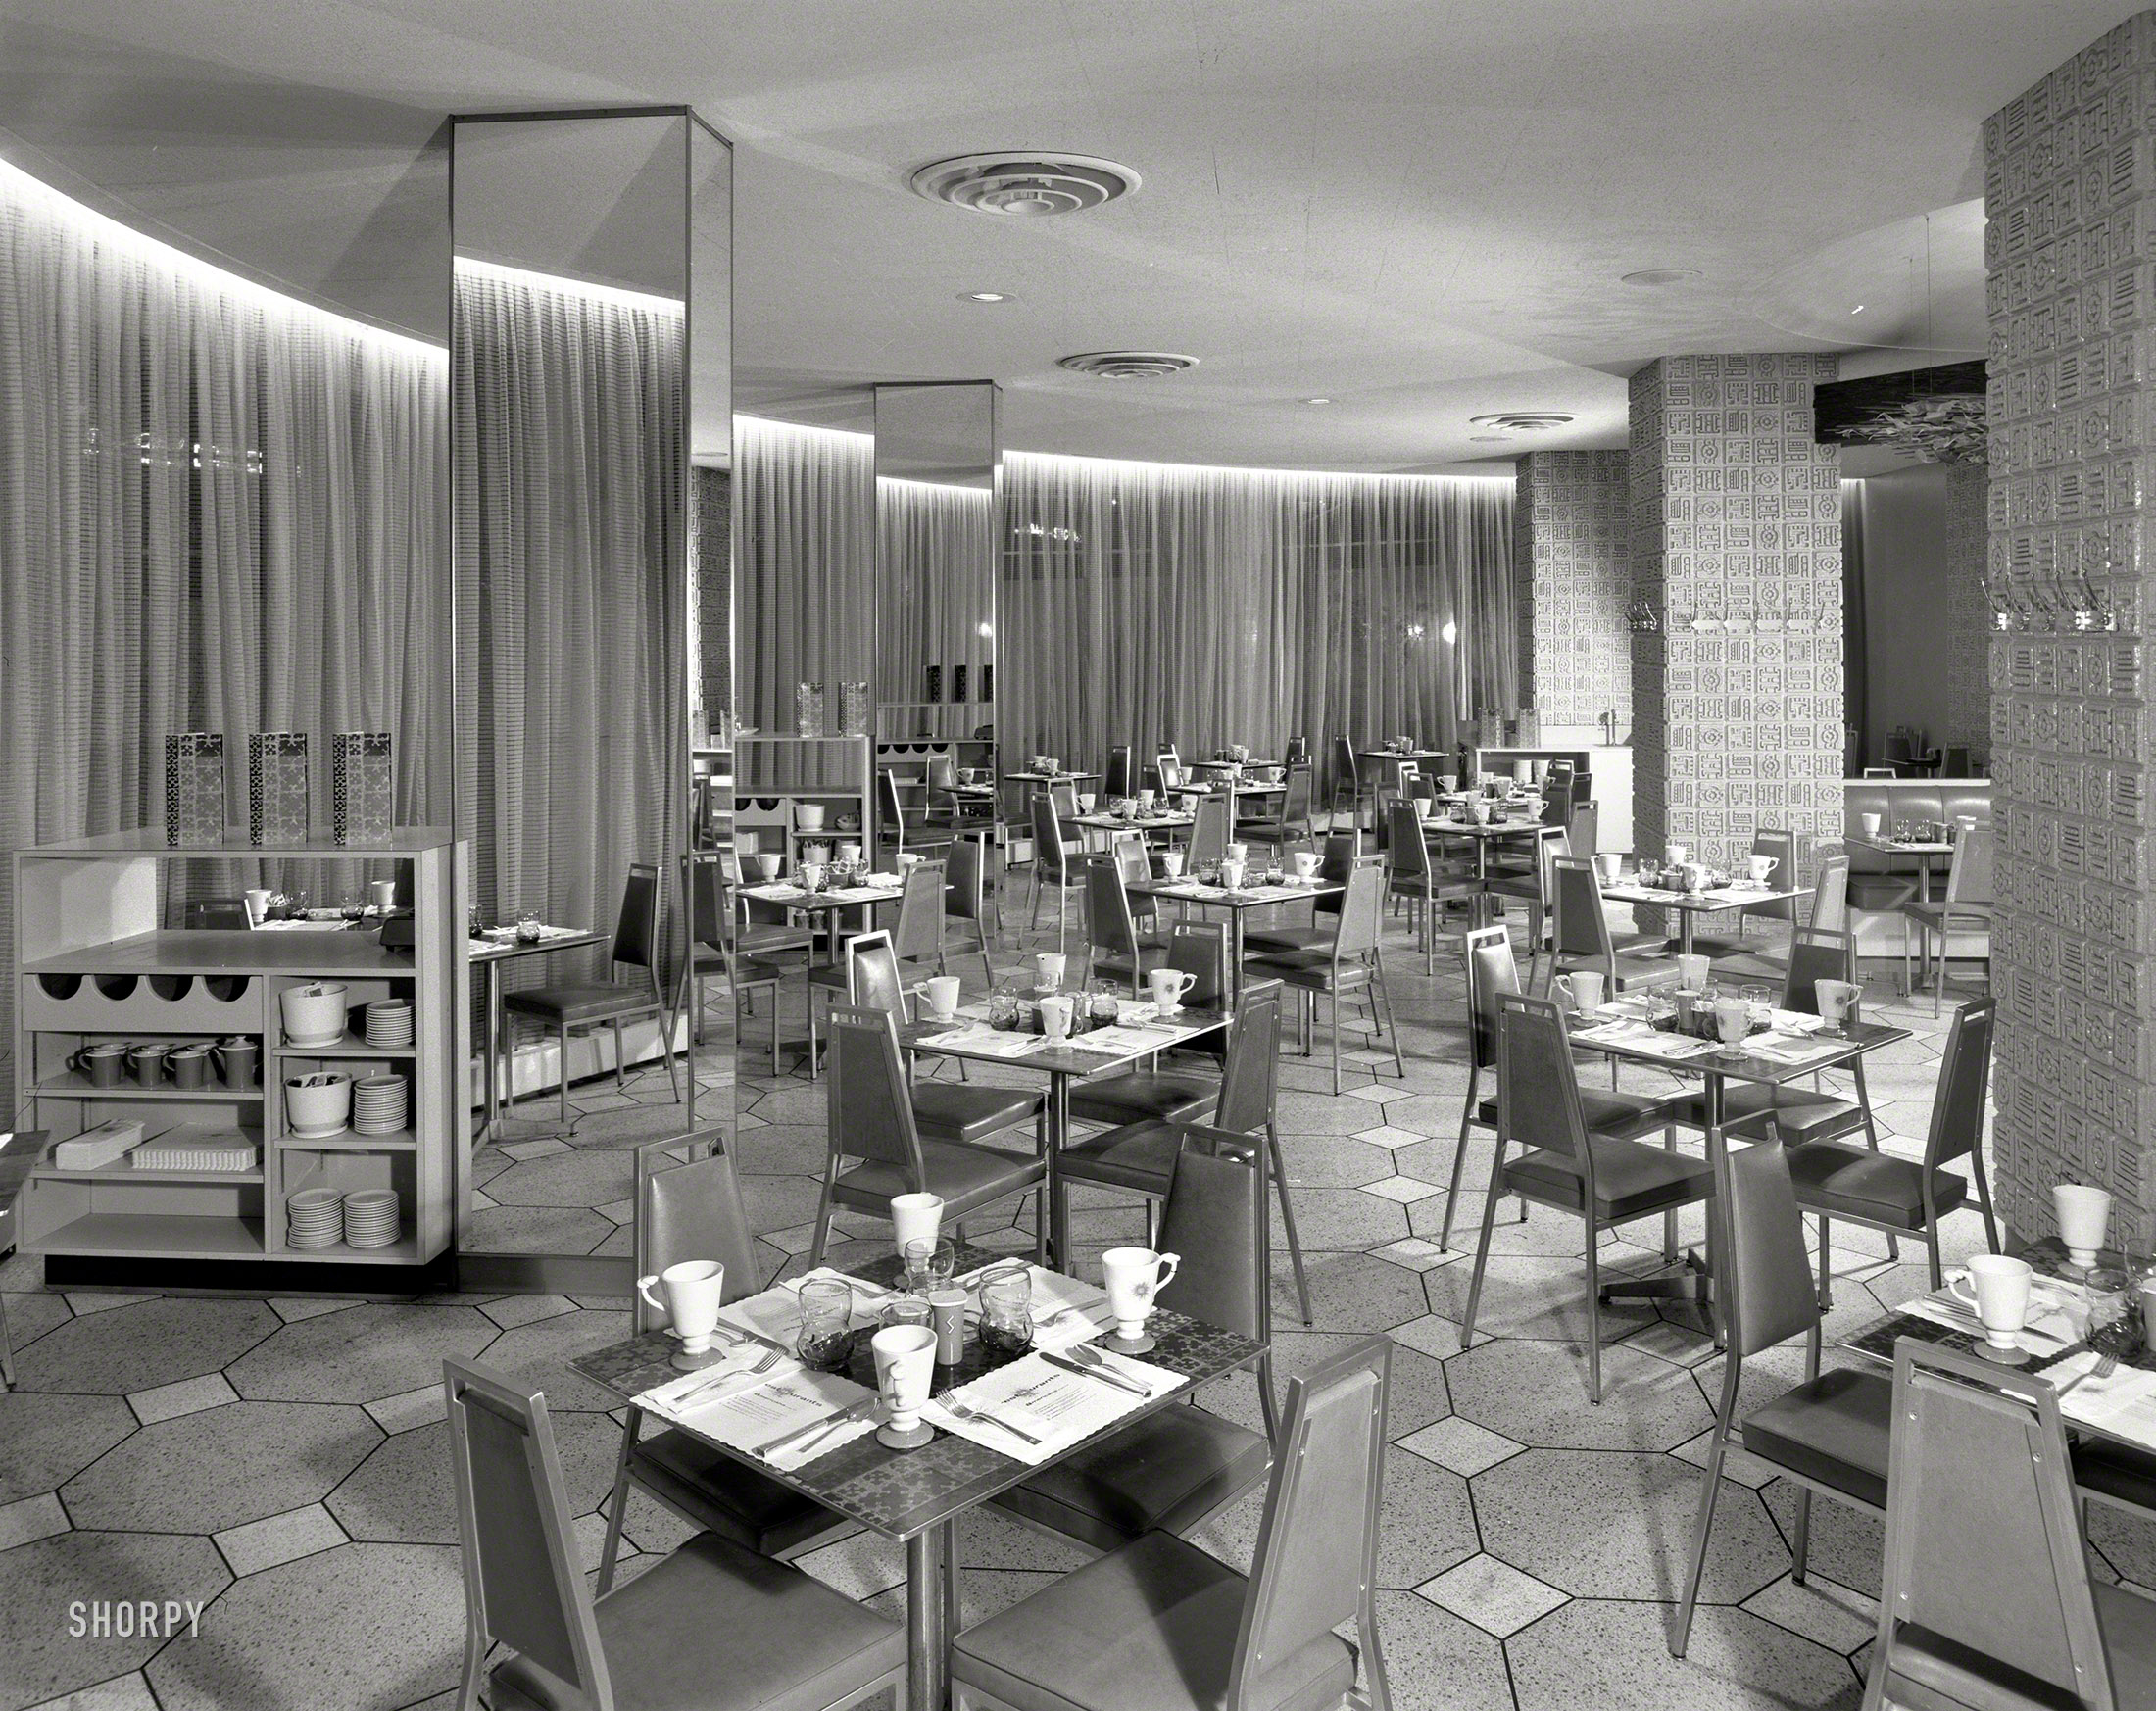 October 31, 1962. "Americana Hotel, 52nd Street and Seventh Avenue, New York City. Coffee shop II. Loew's Hotels. Morris Lapidus, Harle & Liebman architects." Large-format acetate negative by Gottscho-Schleisner. View full size.